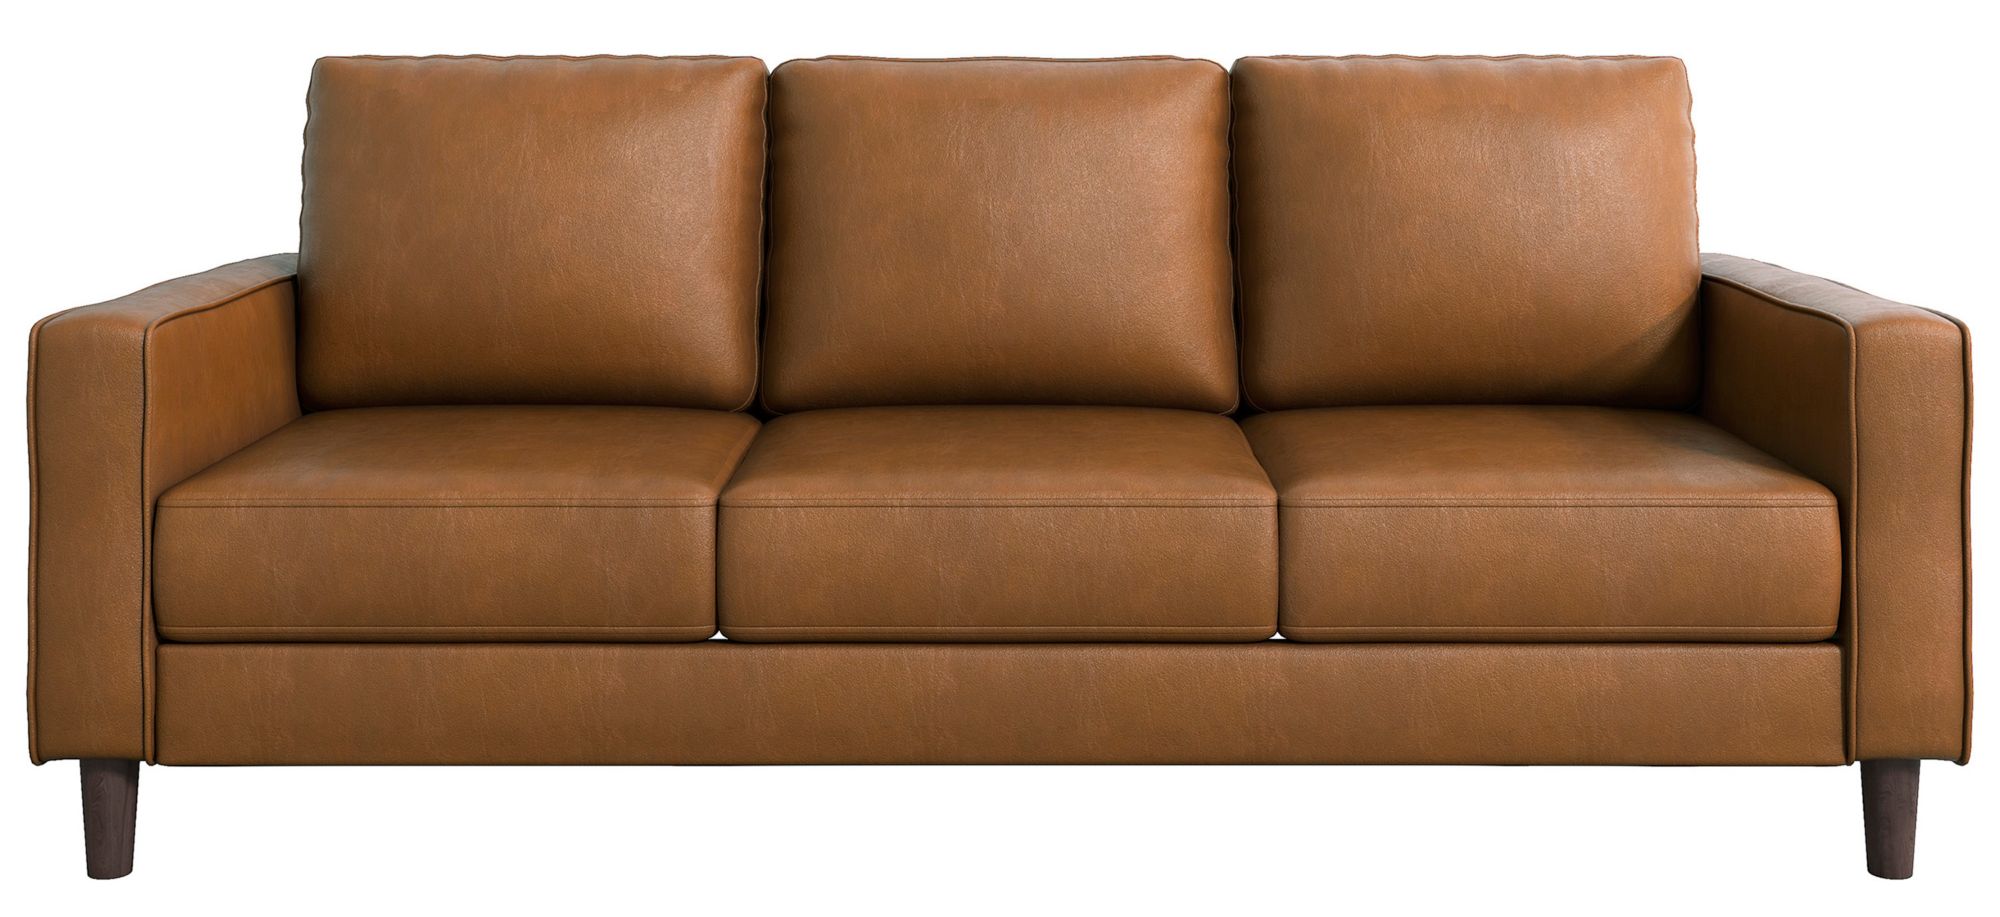 Hinsall Sofa in Brown by Homelegance